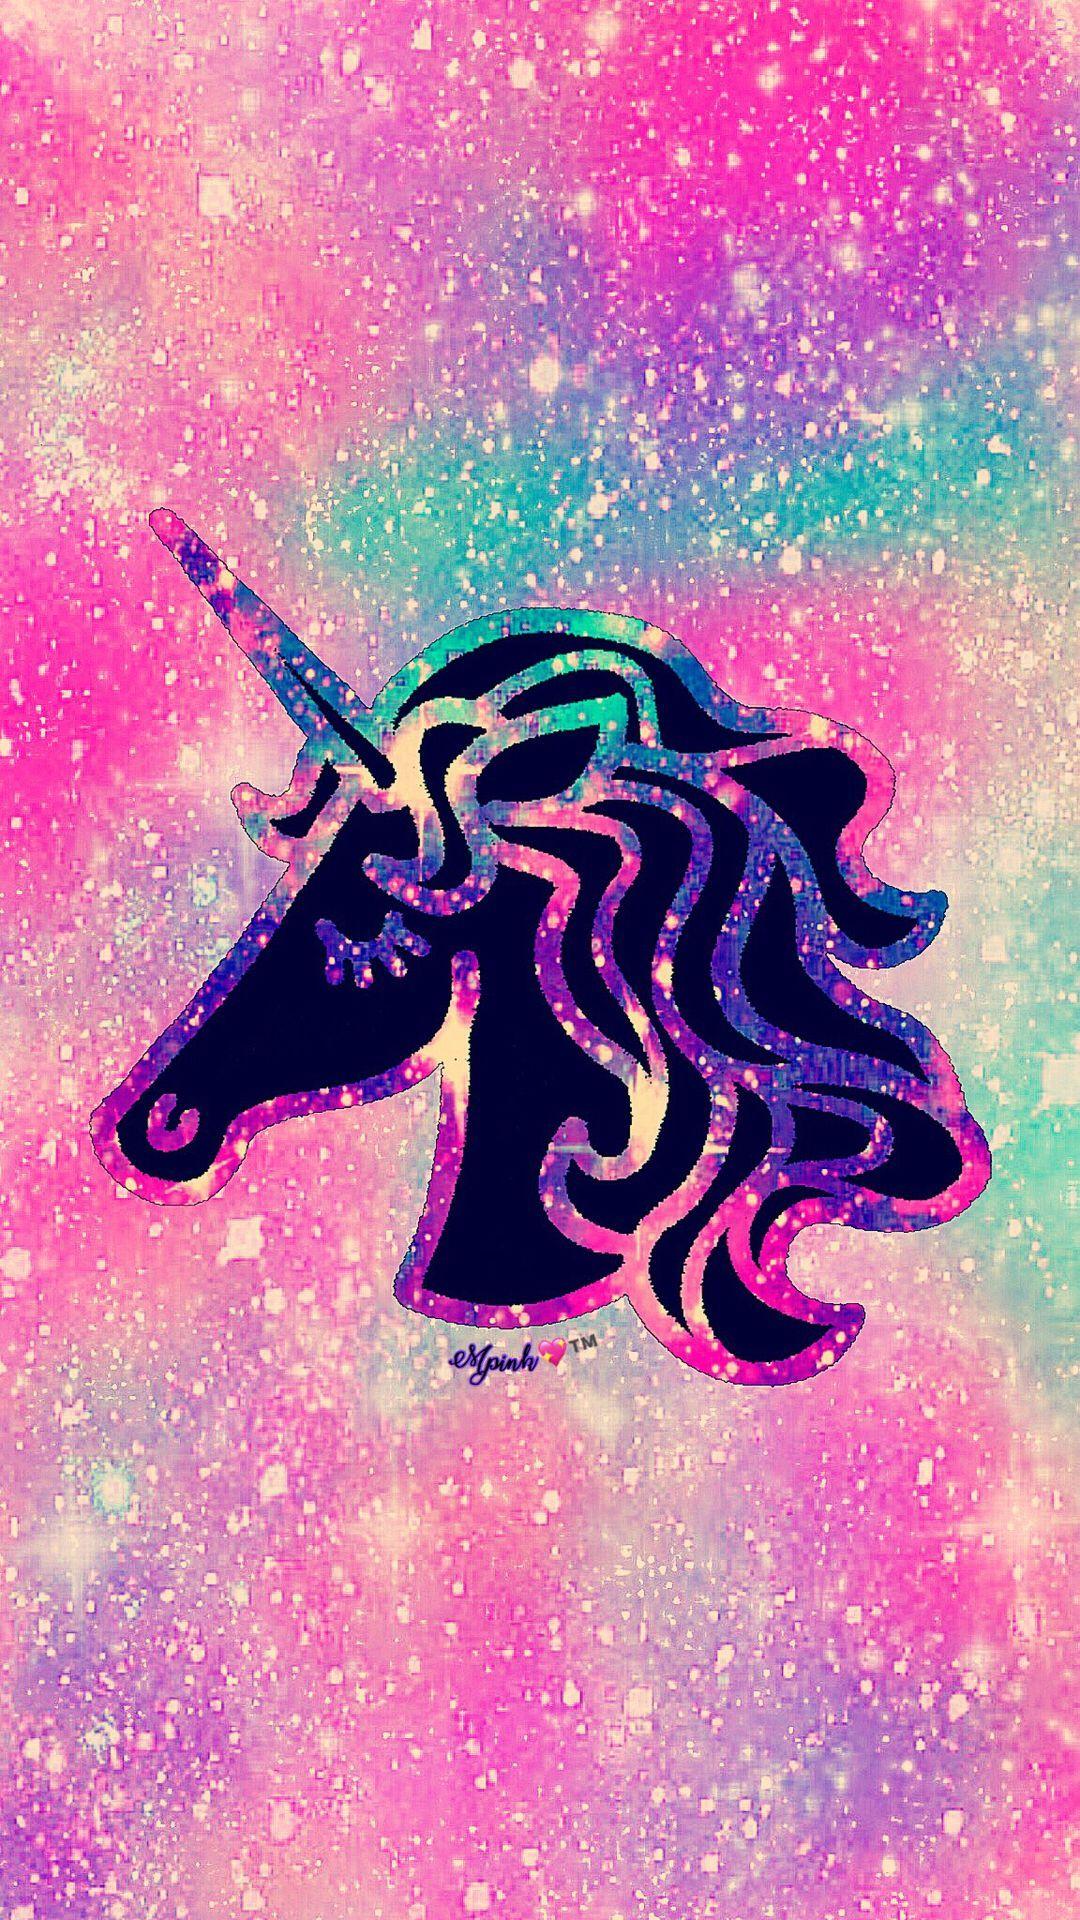 Glitter and Unicorns Wallpapers - Top Free Glitter and ...